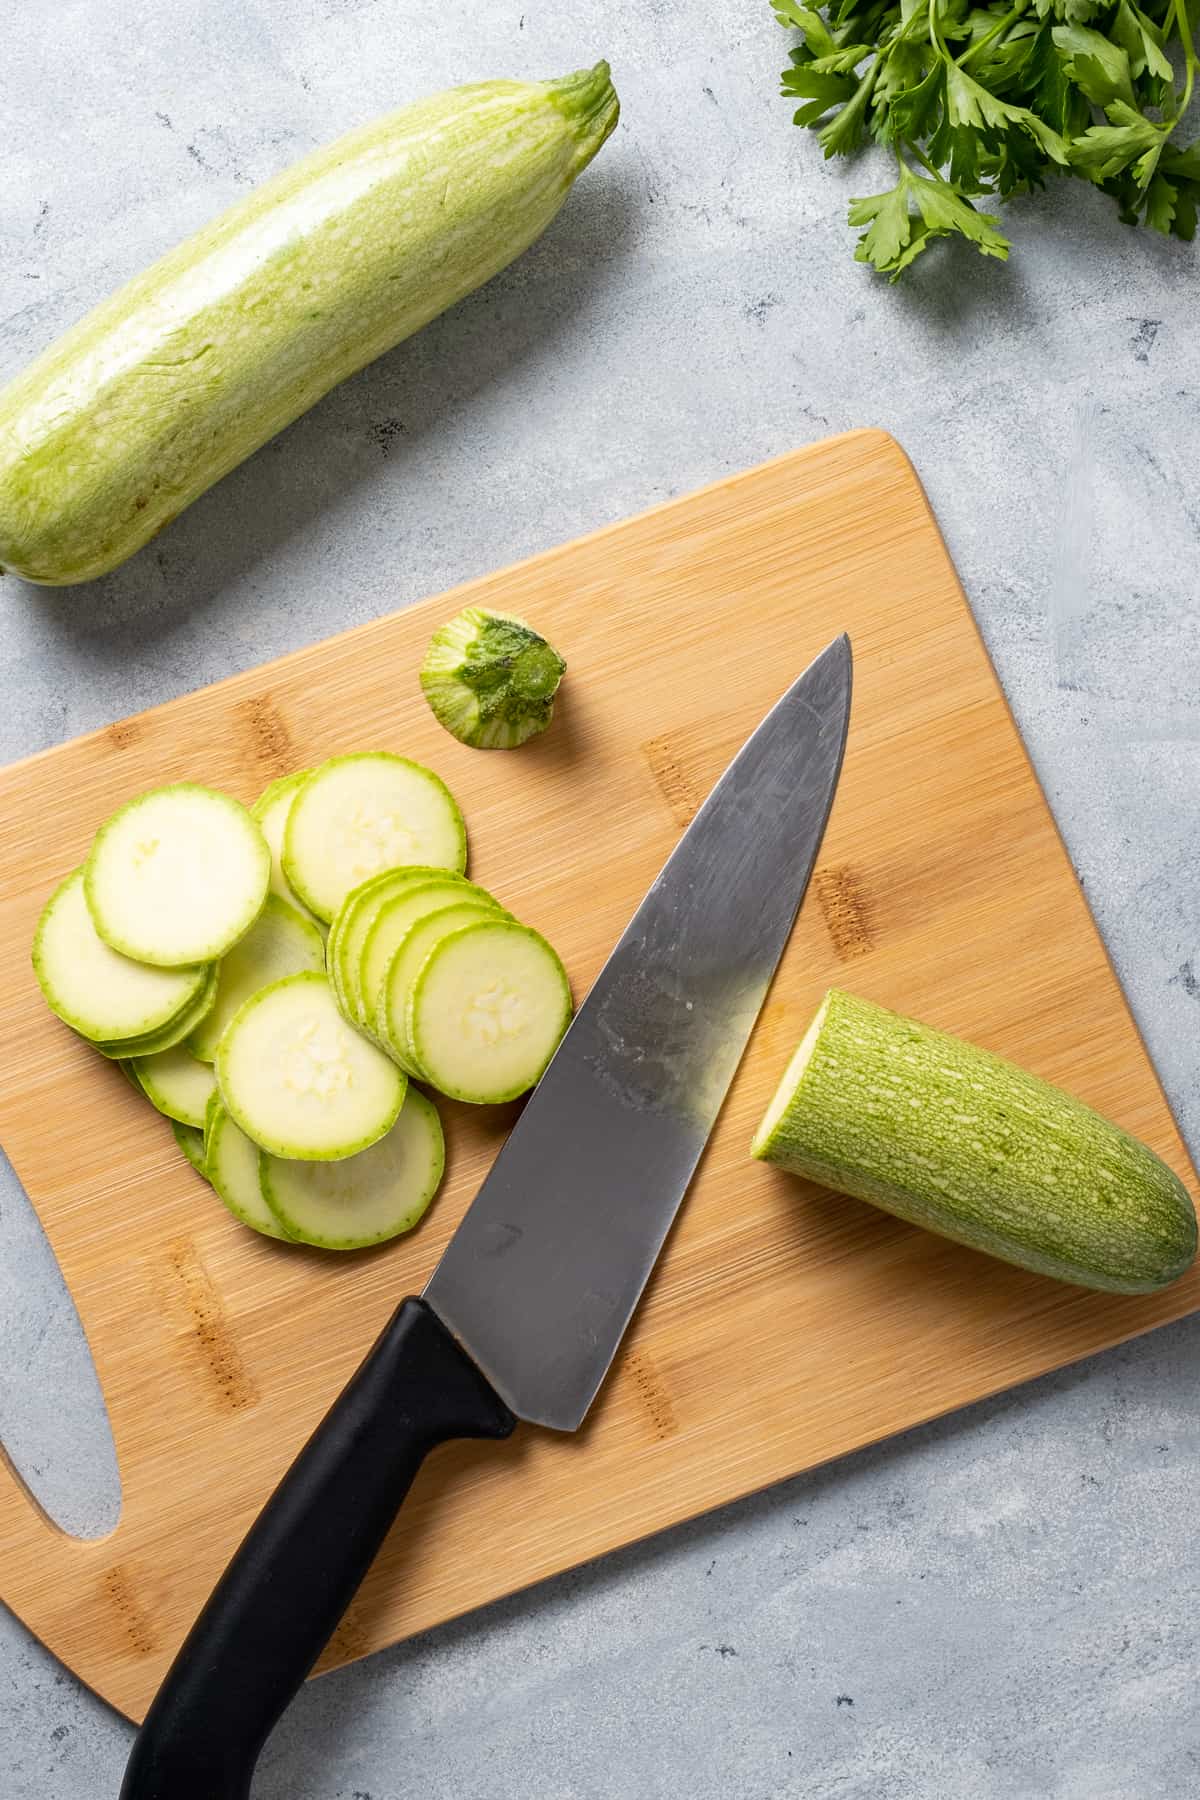 Sliced zucchini and a knife on a wooden cutting board.